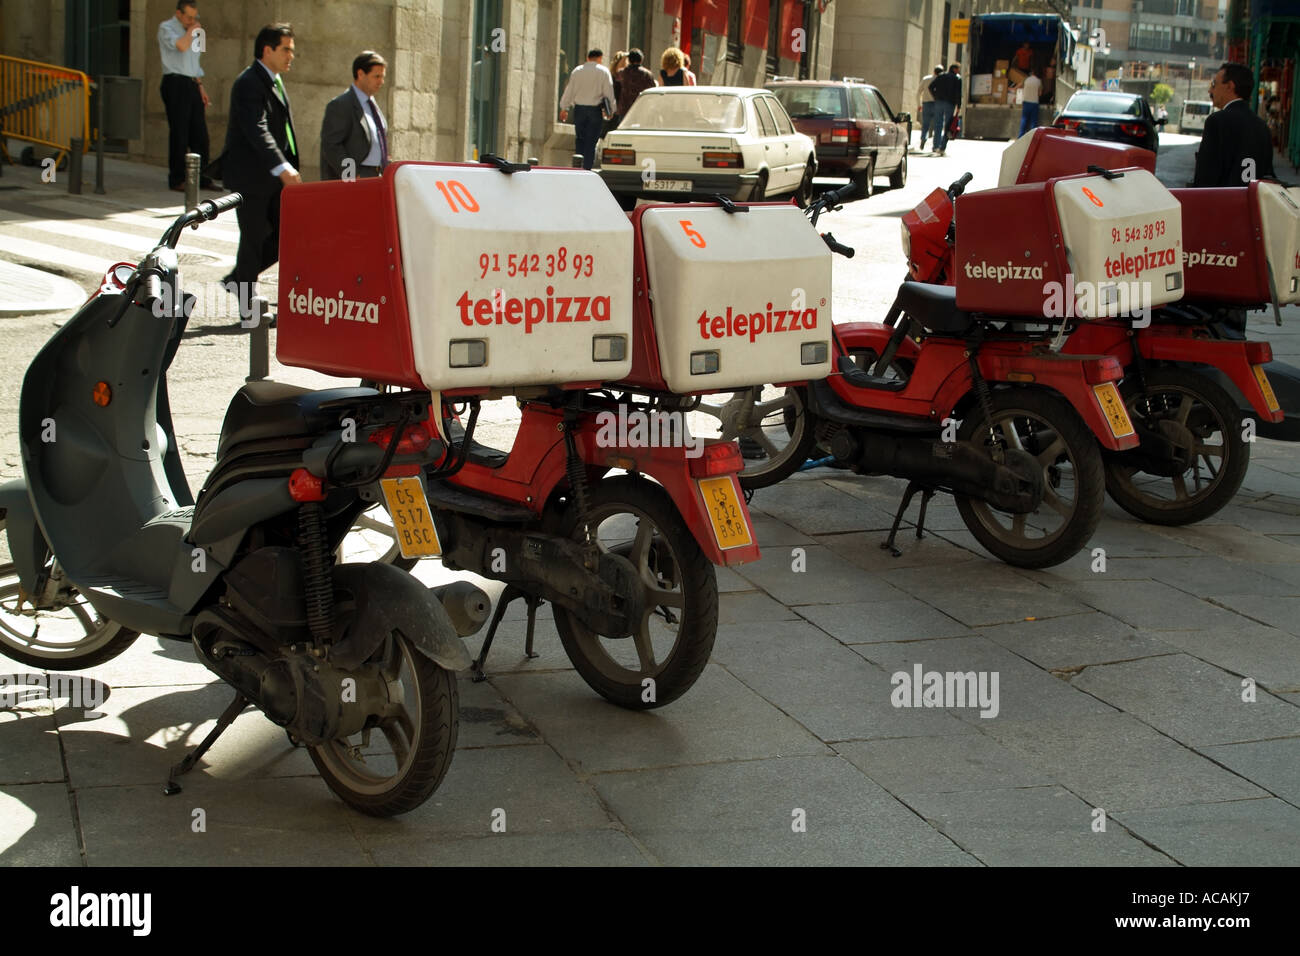 pizza delivery motorcycles parked on the pavement. Madrid Spain Europe EU Stock Photo